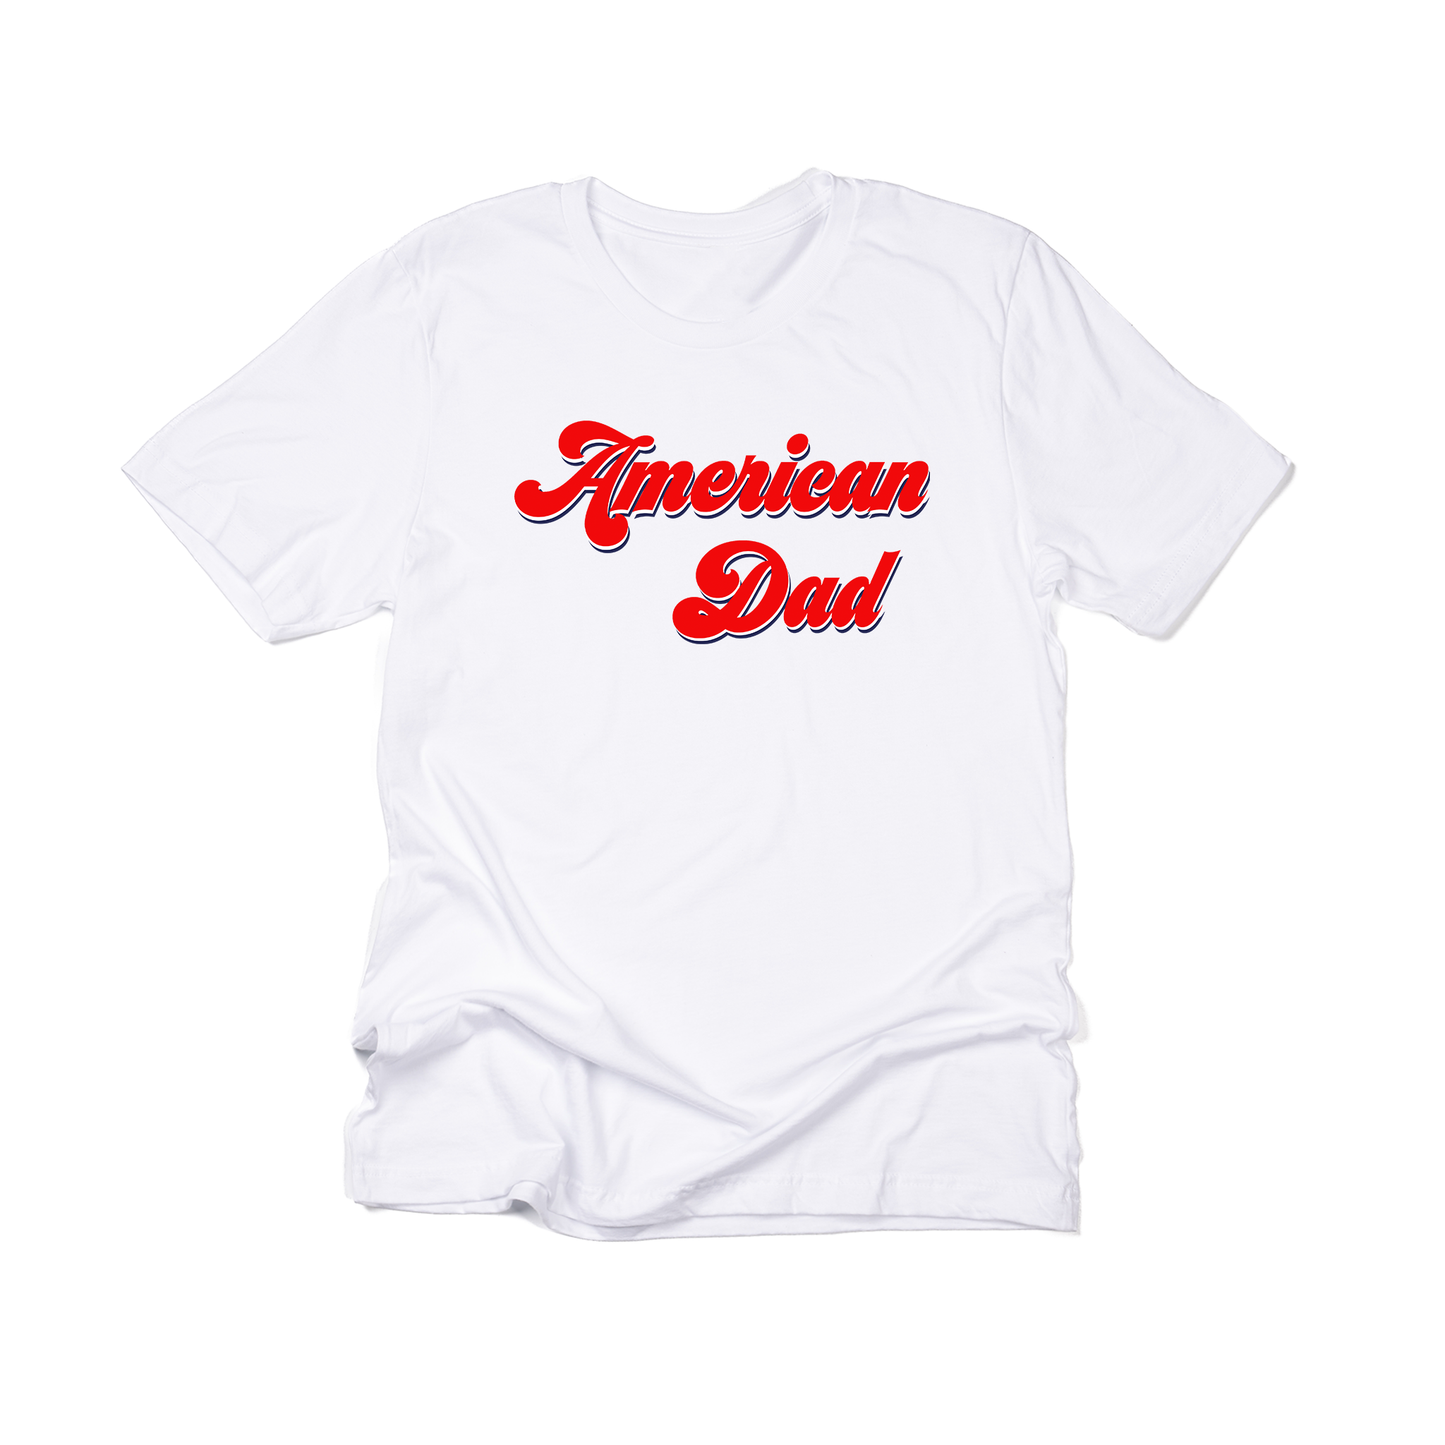 American Dad (Red) - Tee (White)